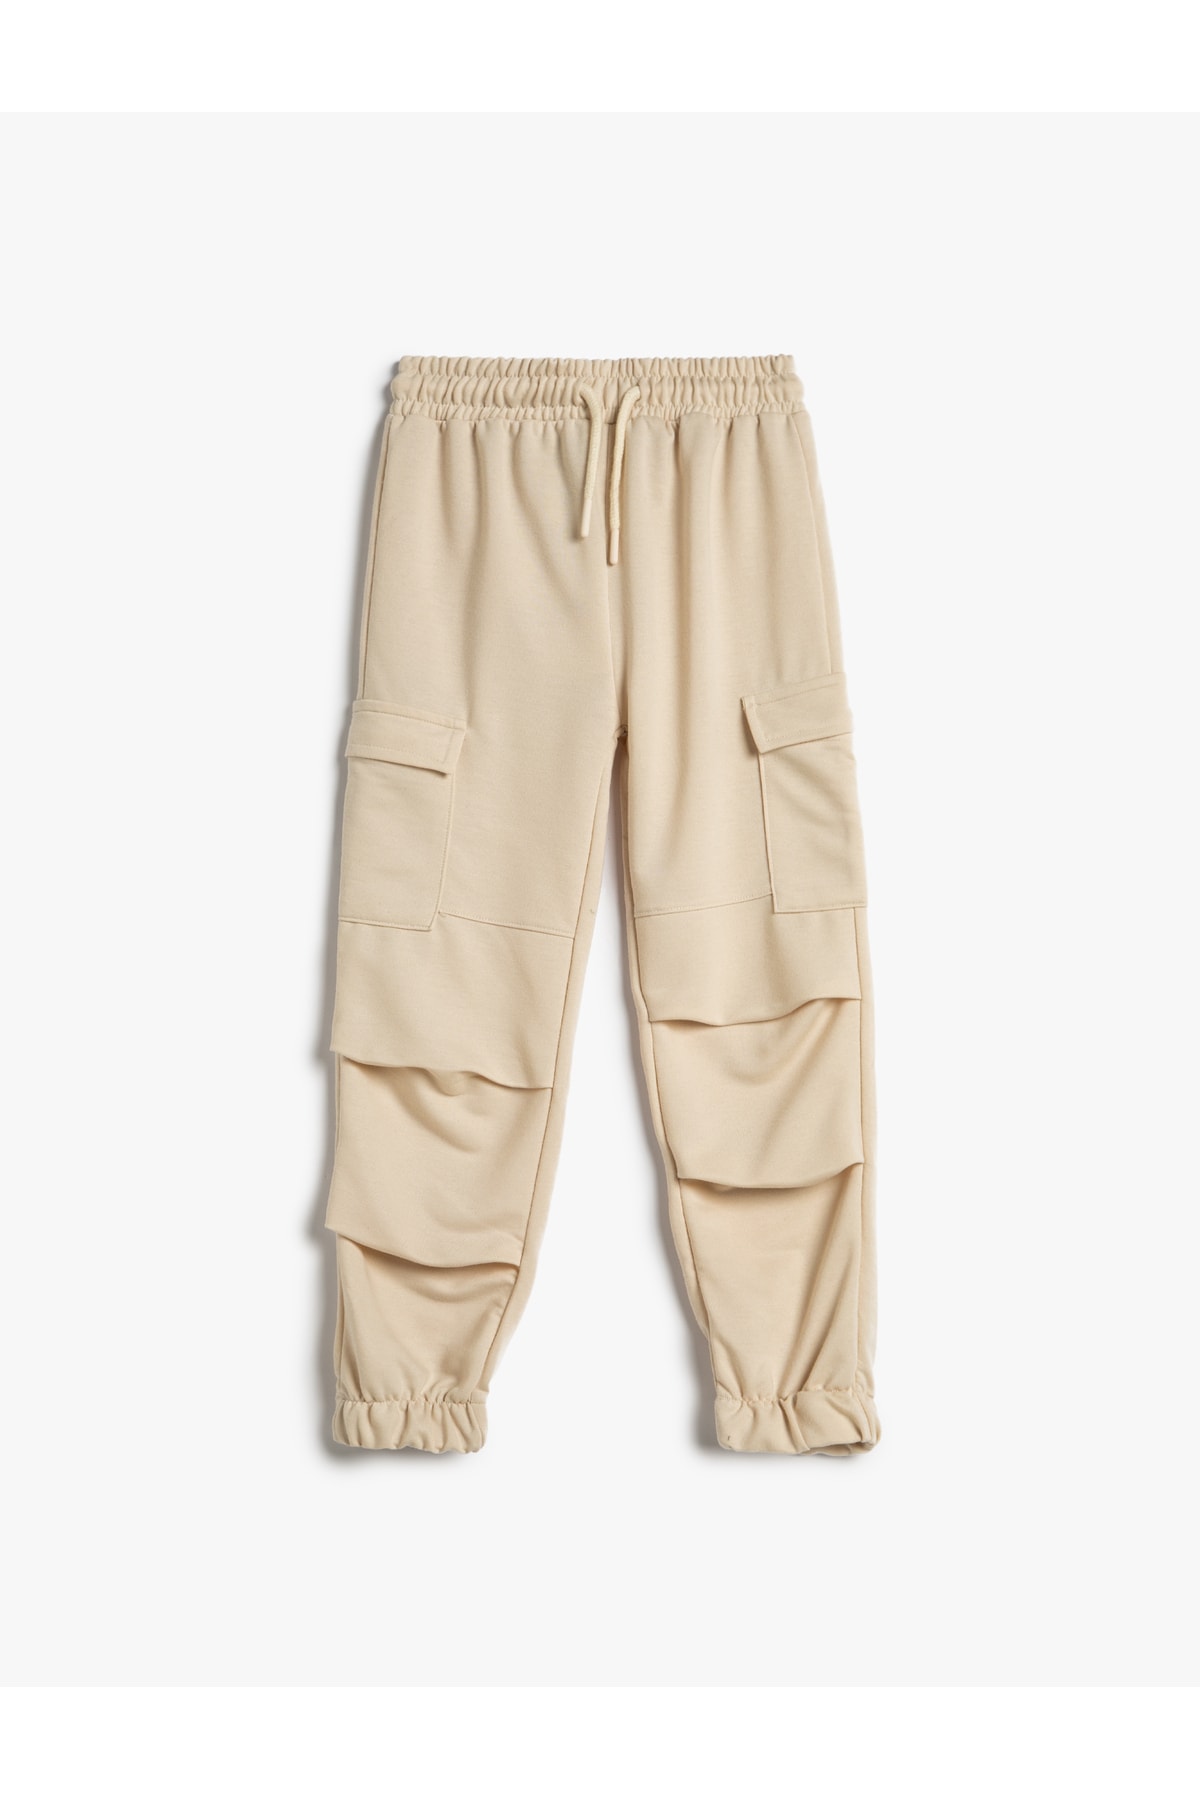 Levně Koton Cargo Sweatpants with Layer Details Side Pockets with Tie Waist.